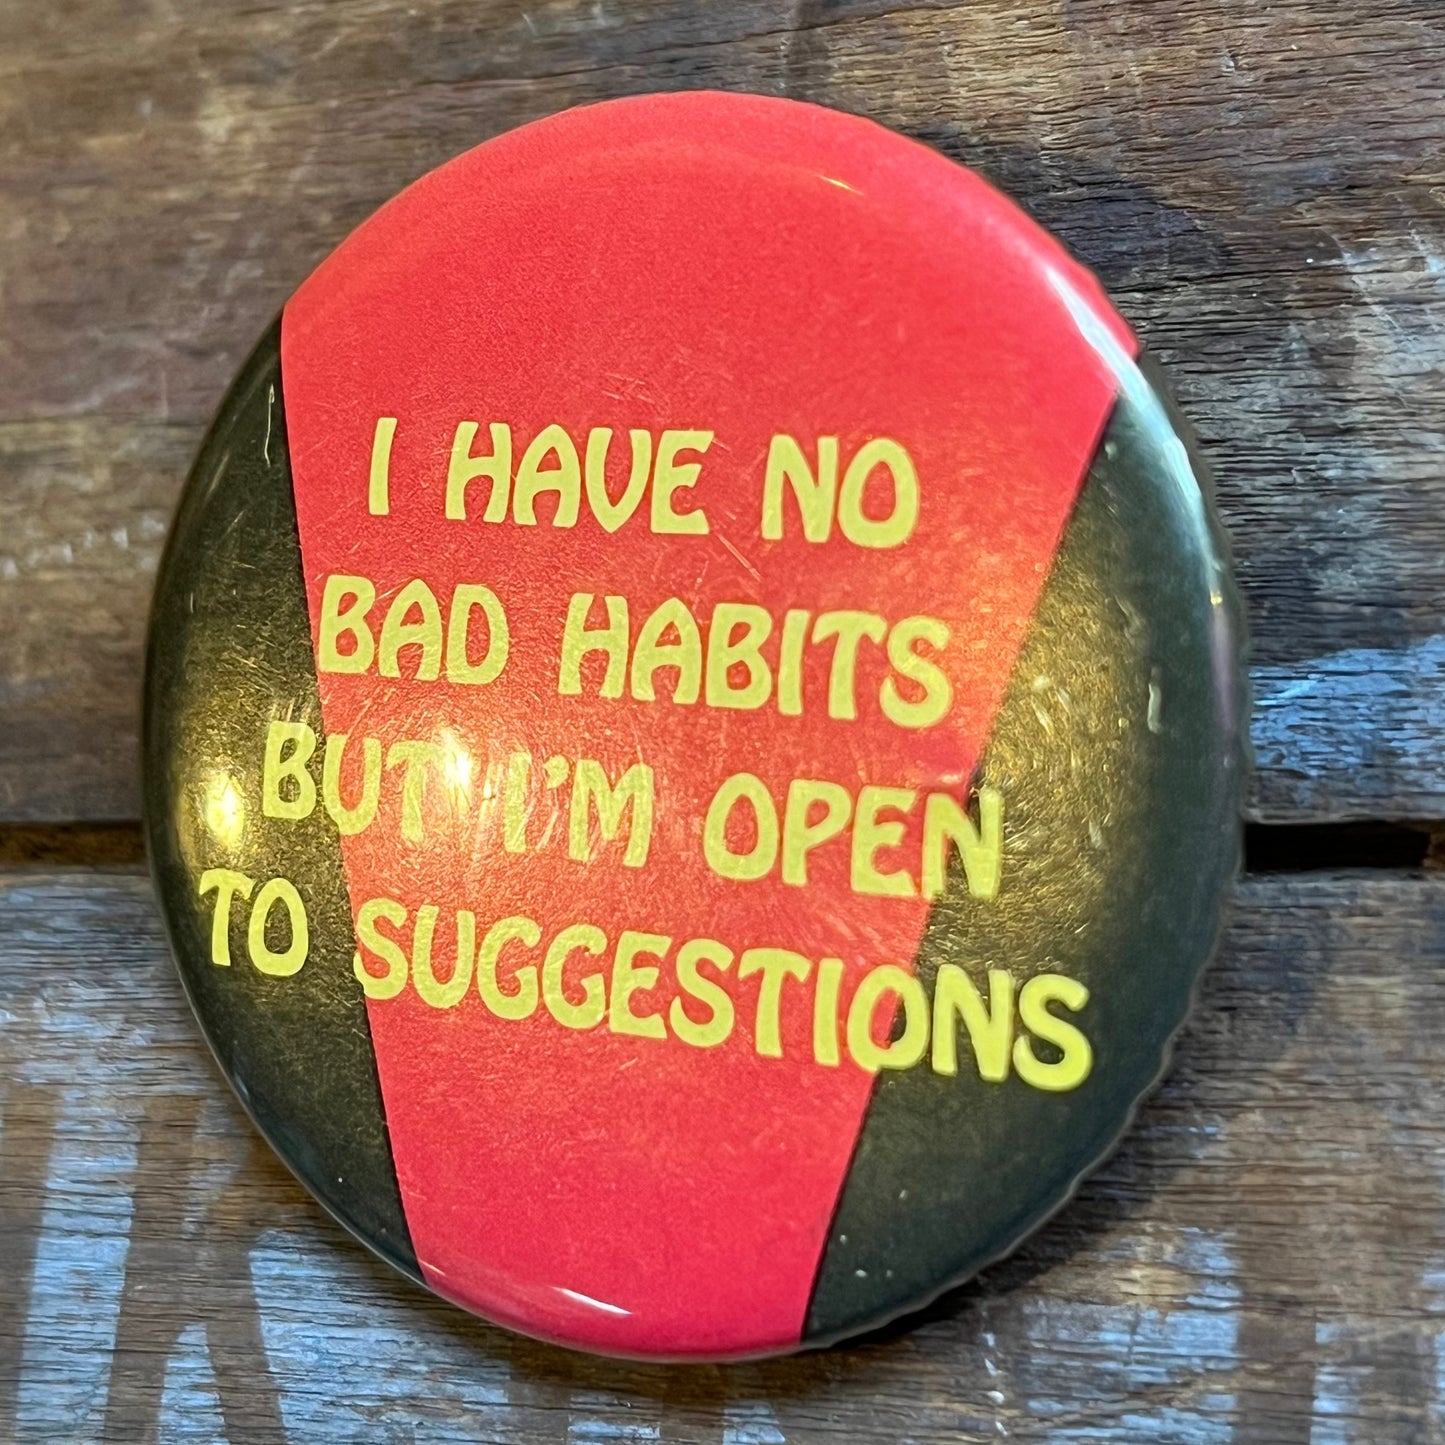 【USA vintage】缶バッジ　I HAVE NO BAD HABITS BUT I’M OPEN TO SUGGESTIONS